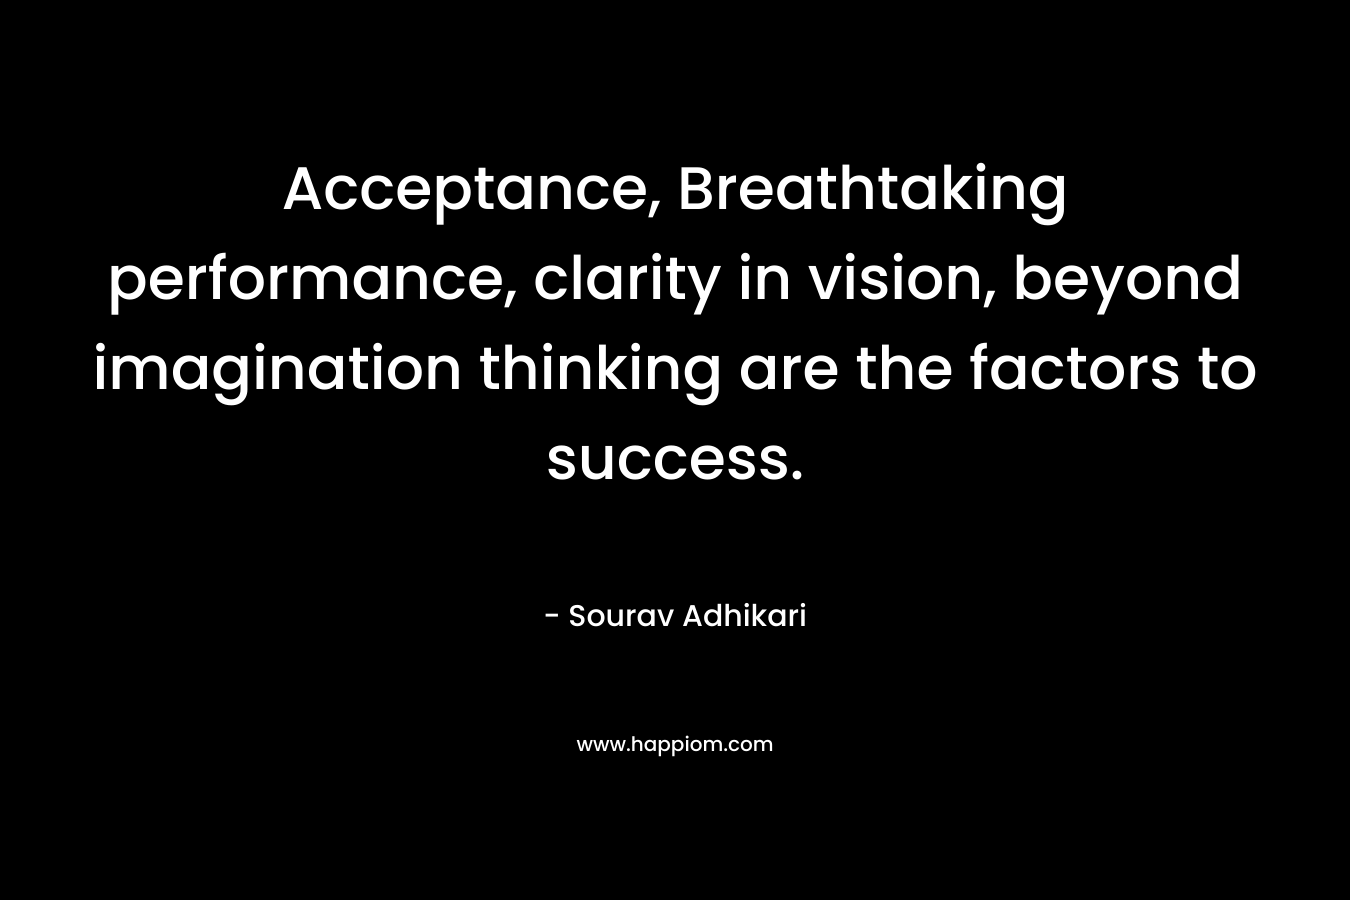 Acceptance, Breathtaking performance, clarity in vision, beyond imagination thinking are the factors to success. – Sourav Adhikari